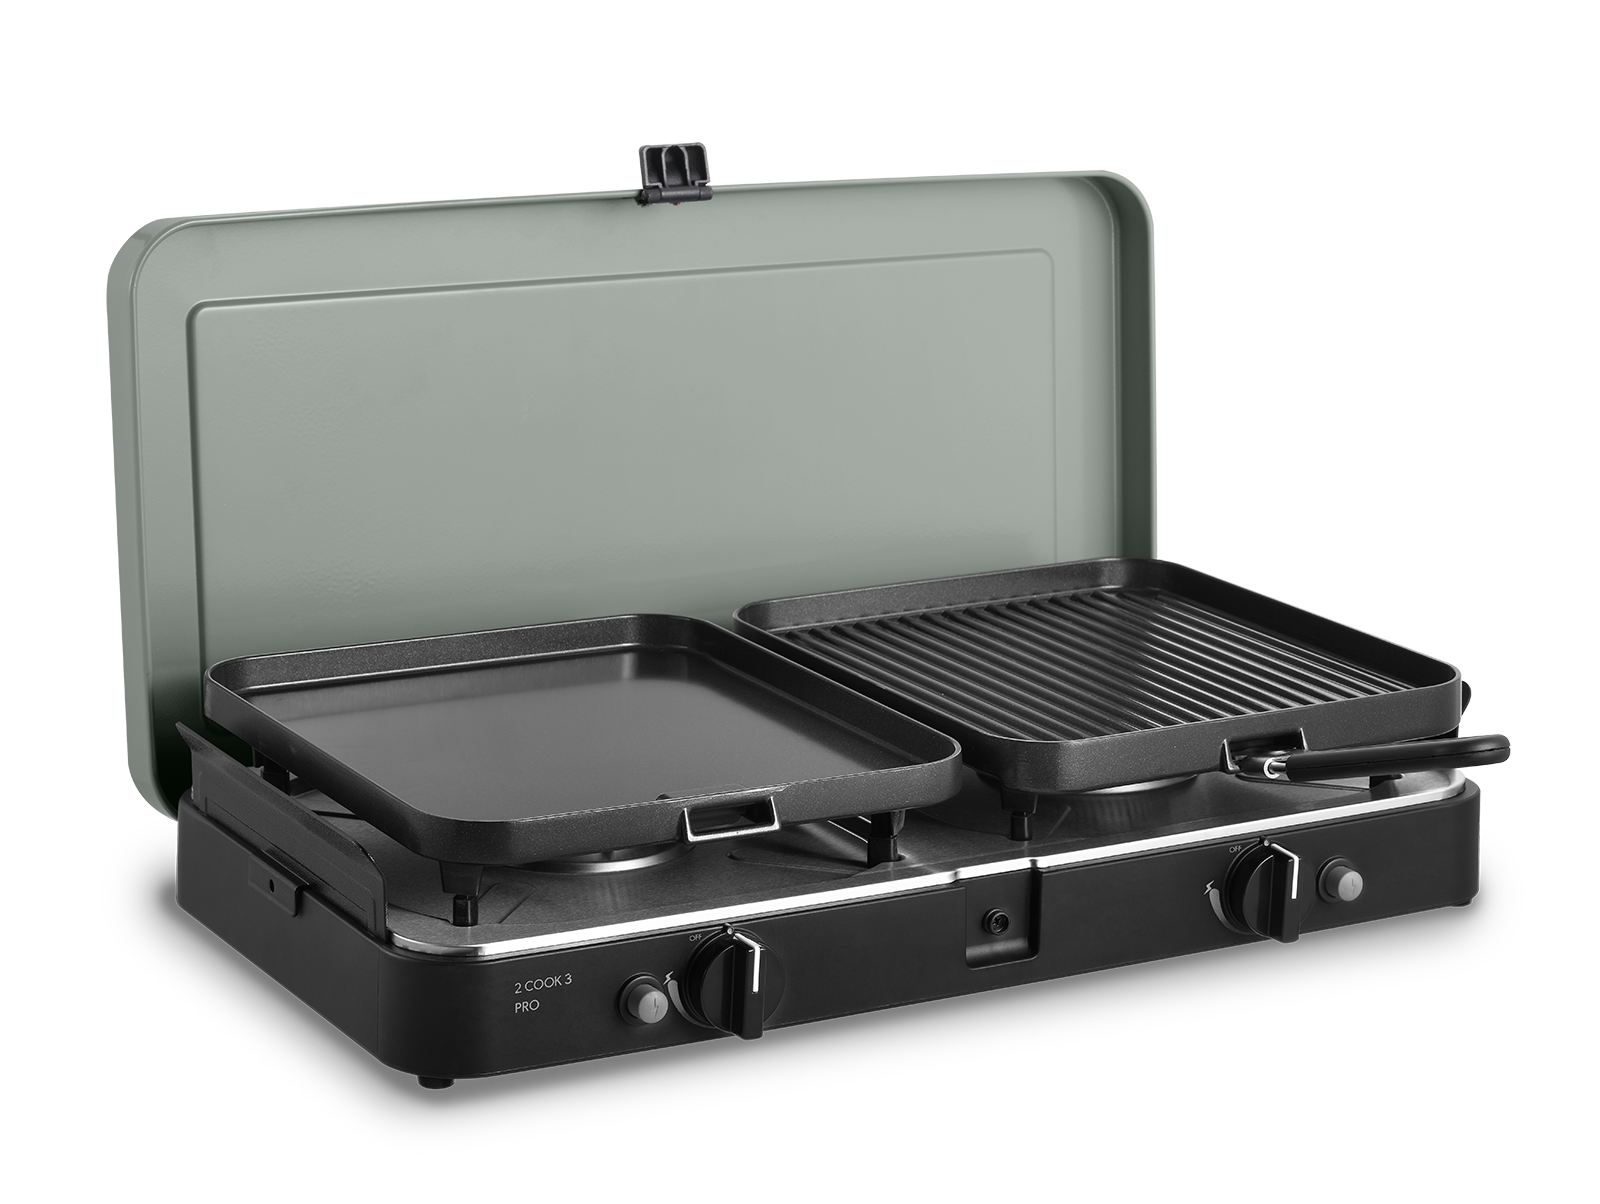 Cadac 2 Cook 3 Pro Deluxe 50mbar